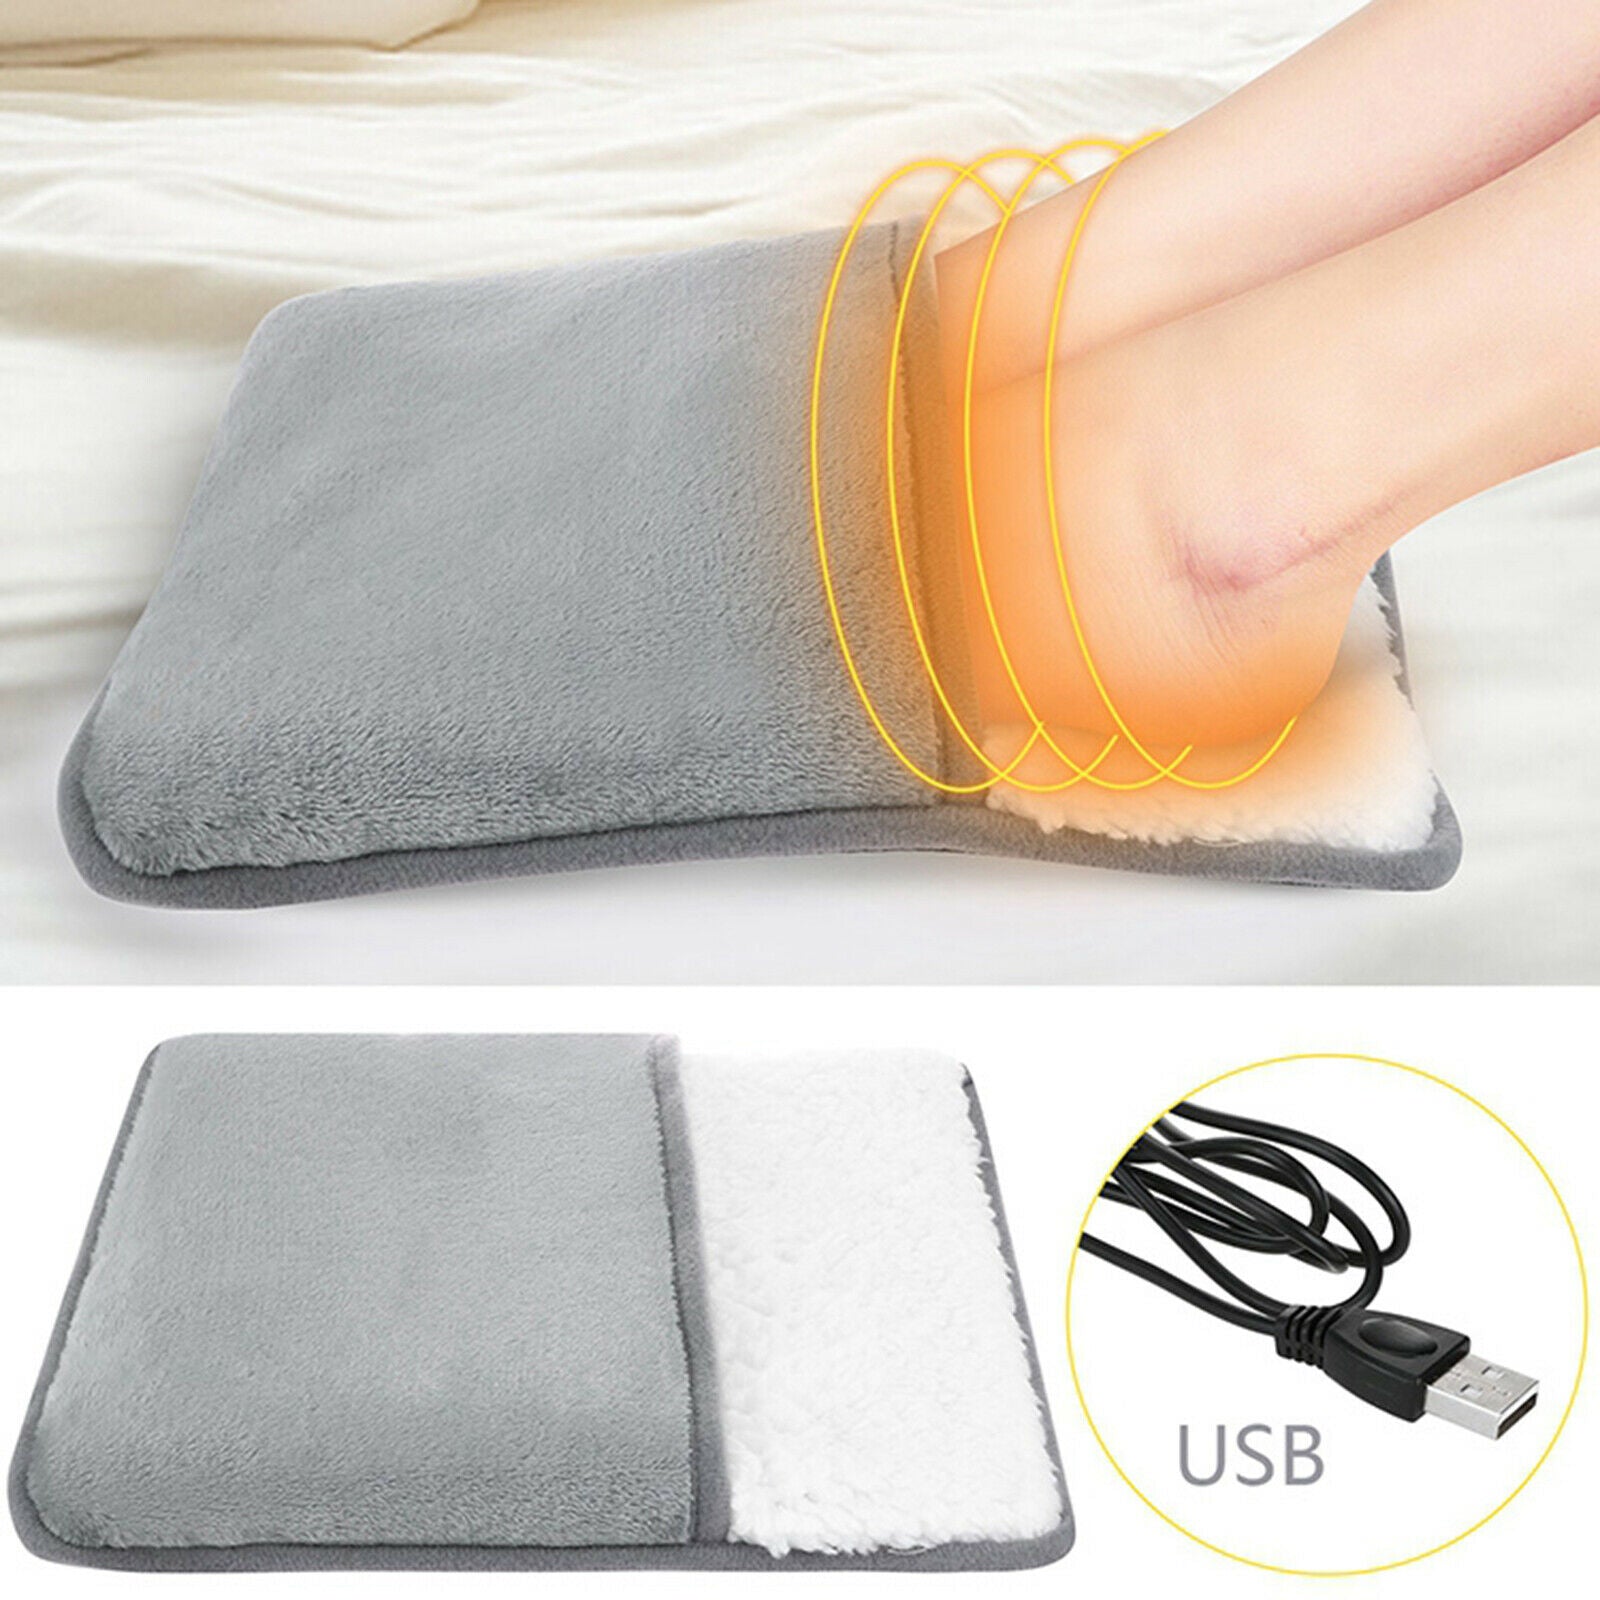 USB Foot Warmer Cushion Electric Heater for Winter Office Heating Foot Warming